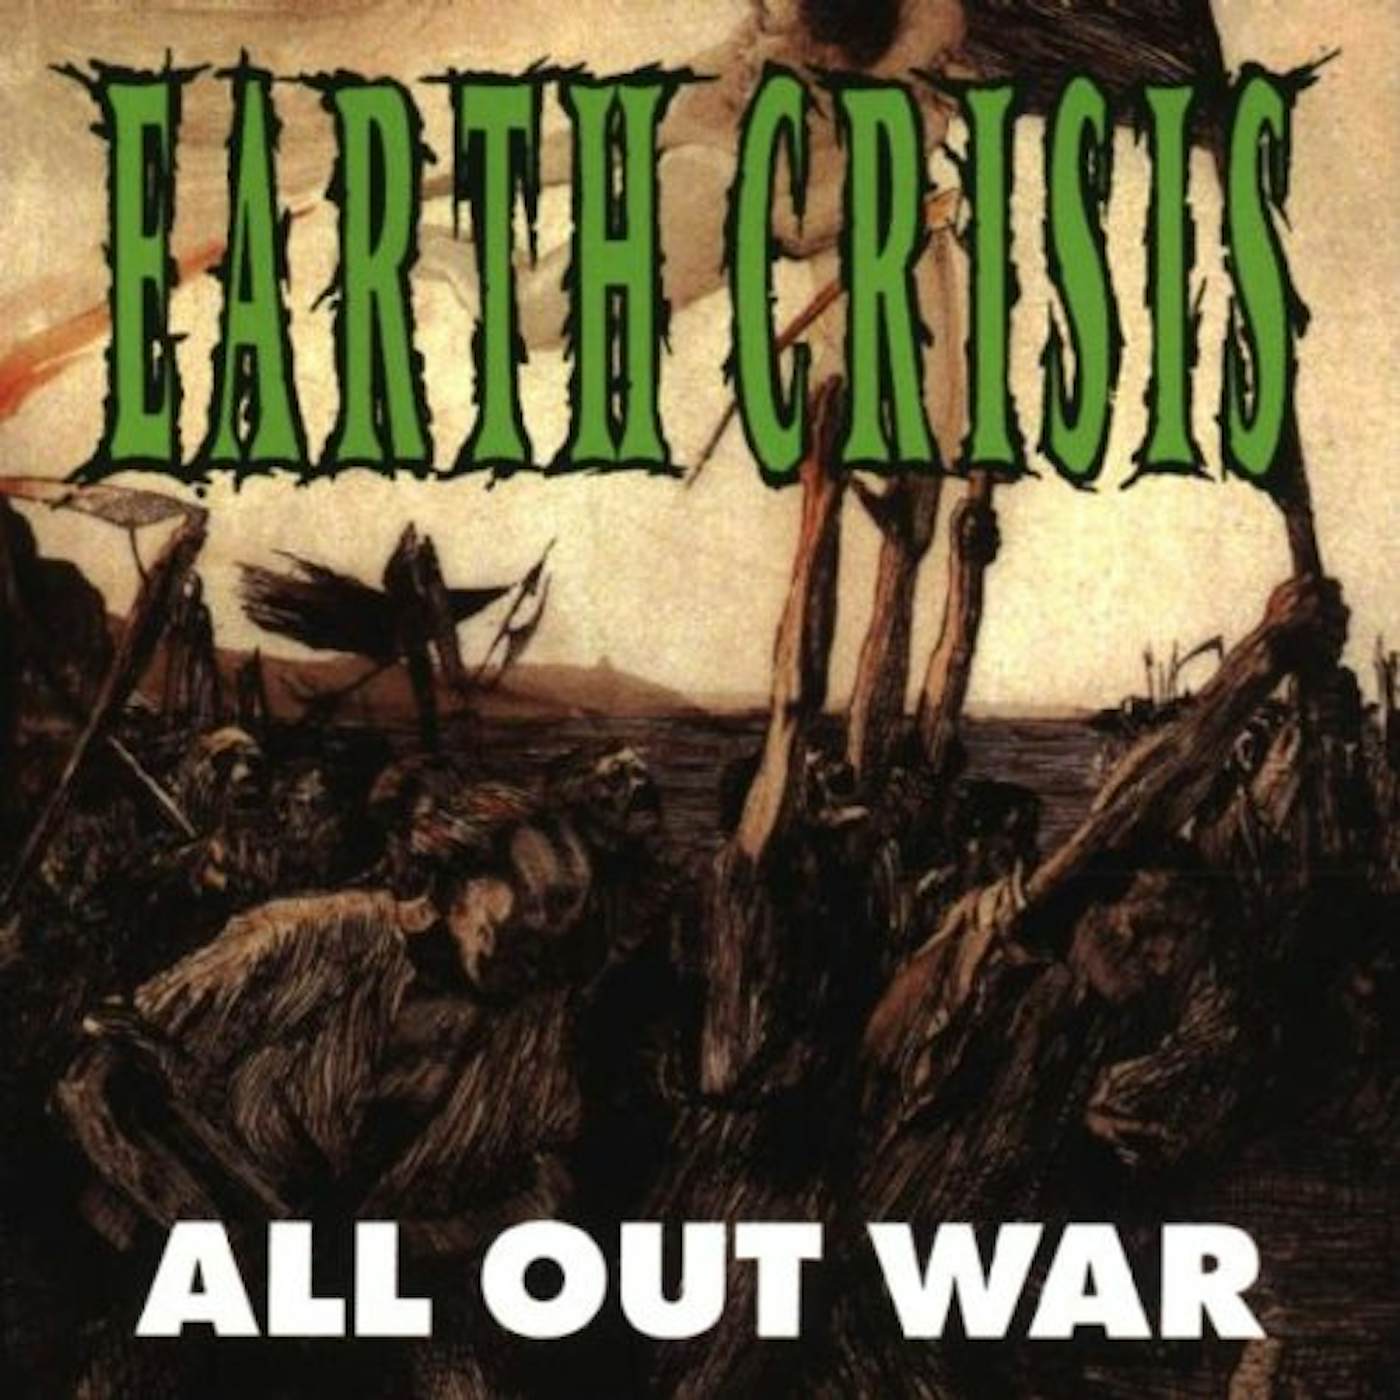 Earth Crisis ALL OUT WAR CD